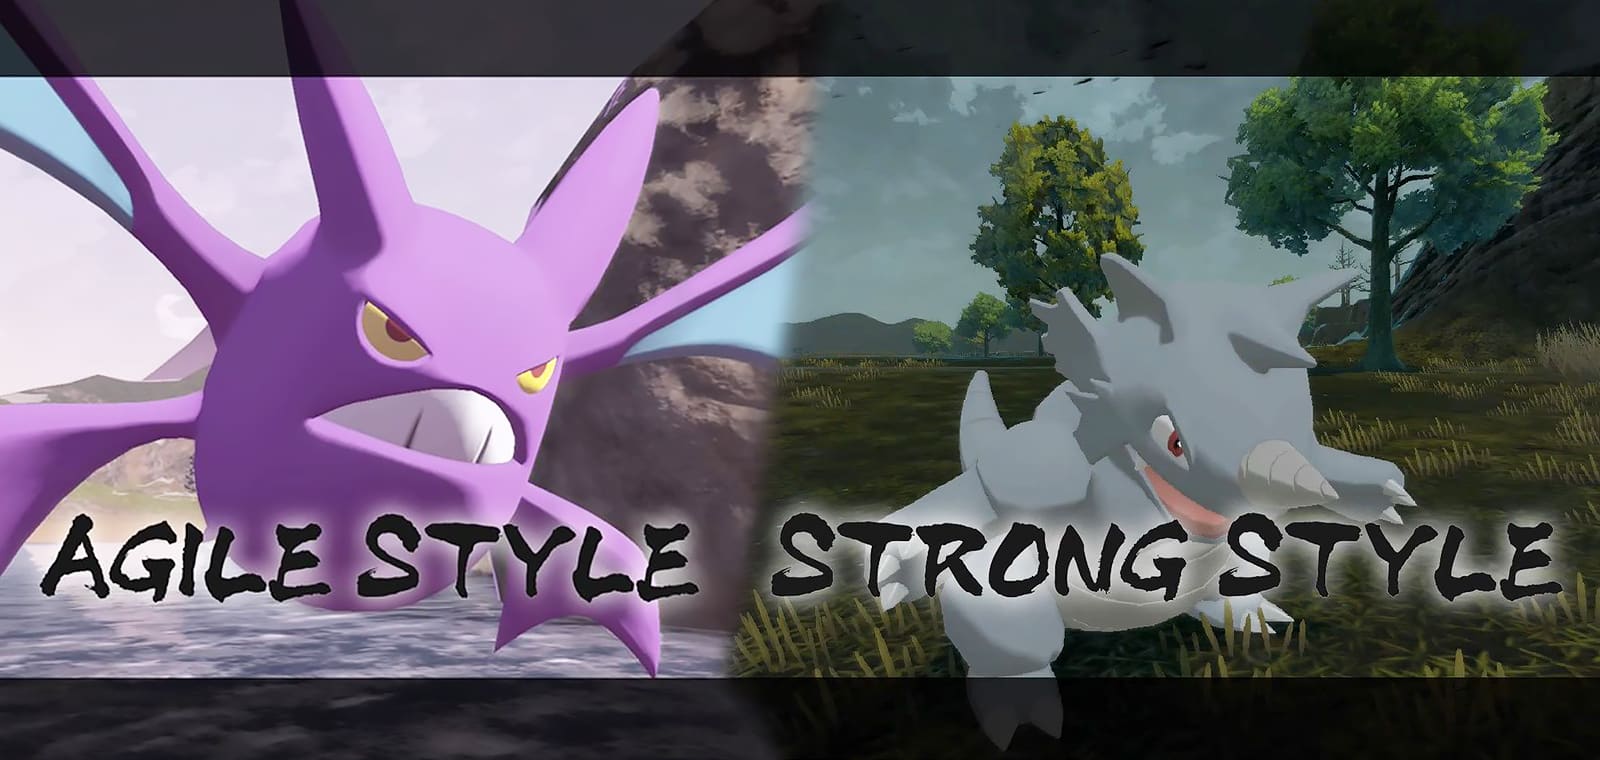 Crobat uses Agile Style to attack twice, while Rhydon uses Strong Style to hit like a truck